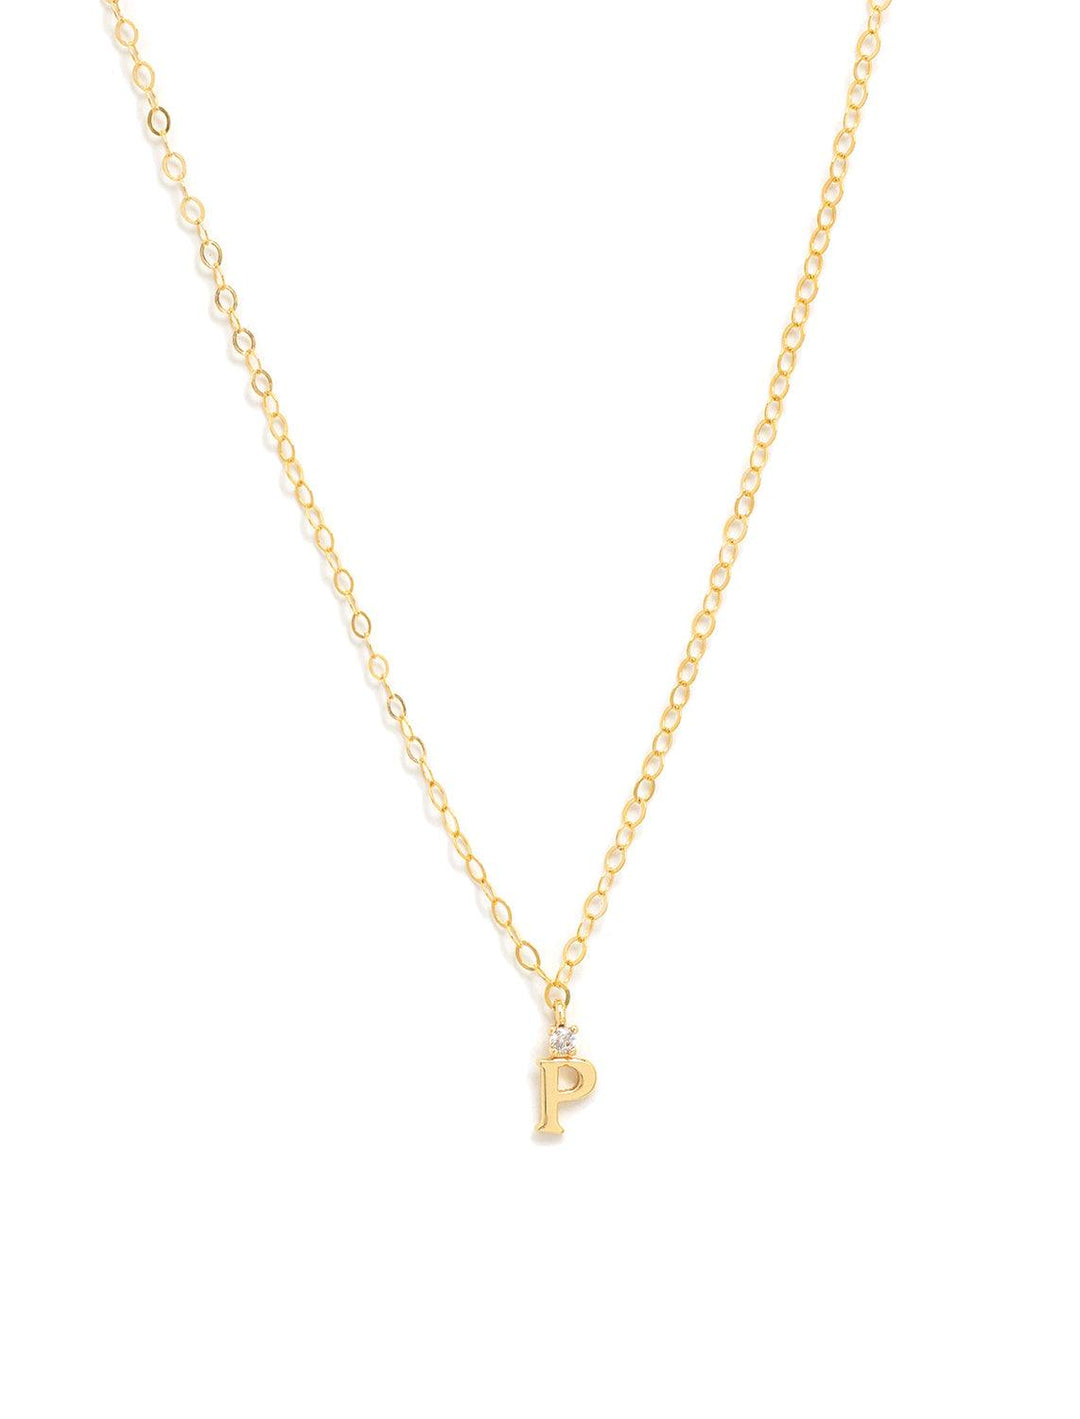 Marit Rae initial and cz necklace in gold | P - Twigs